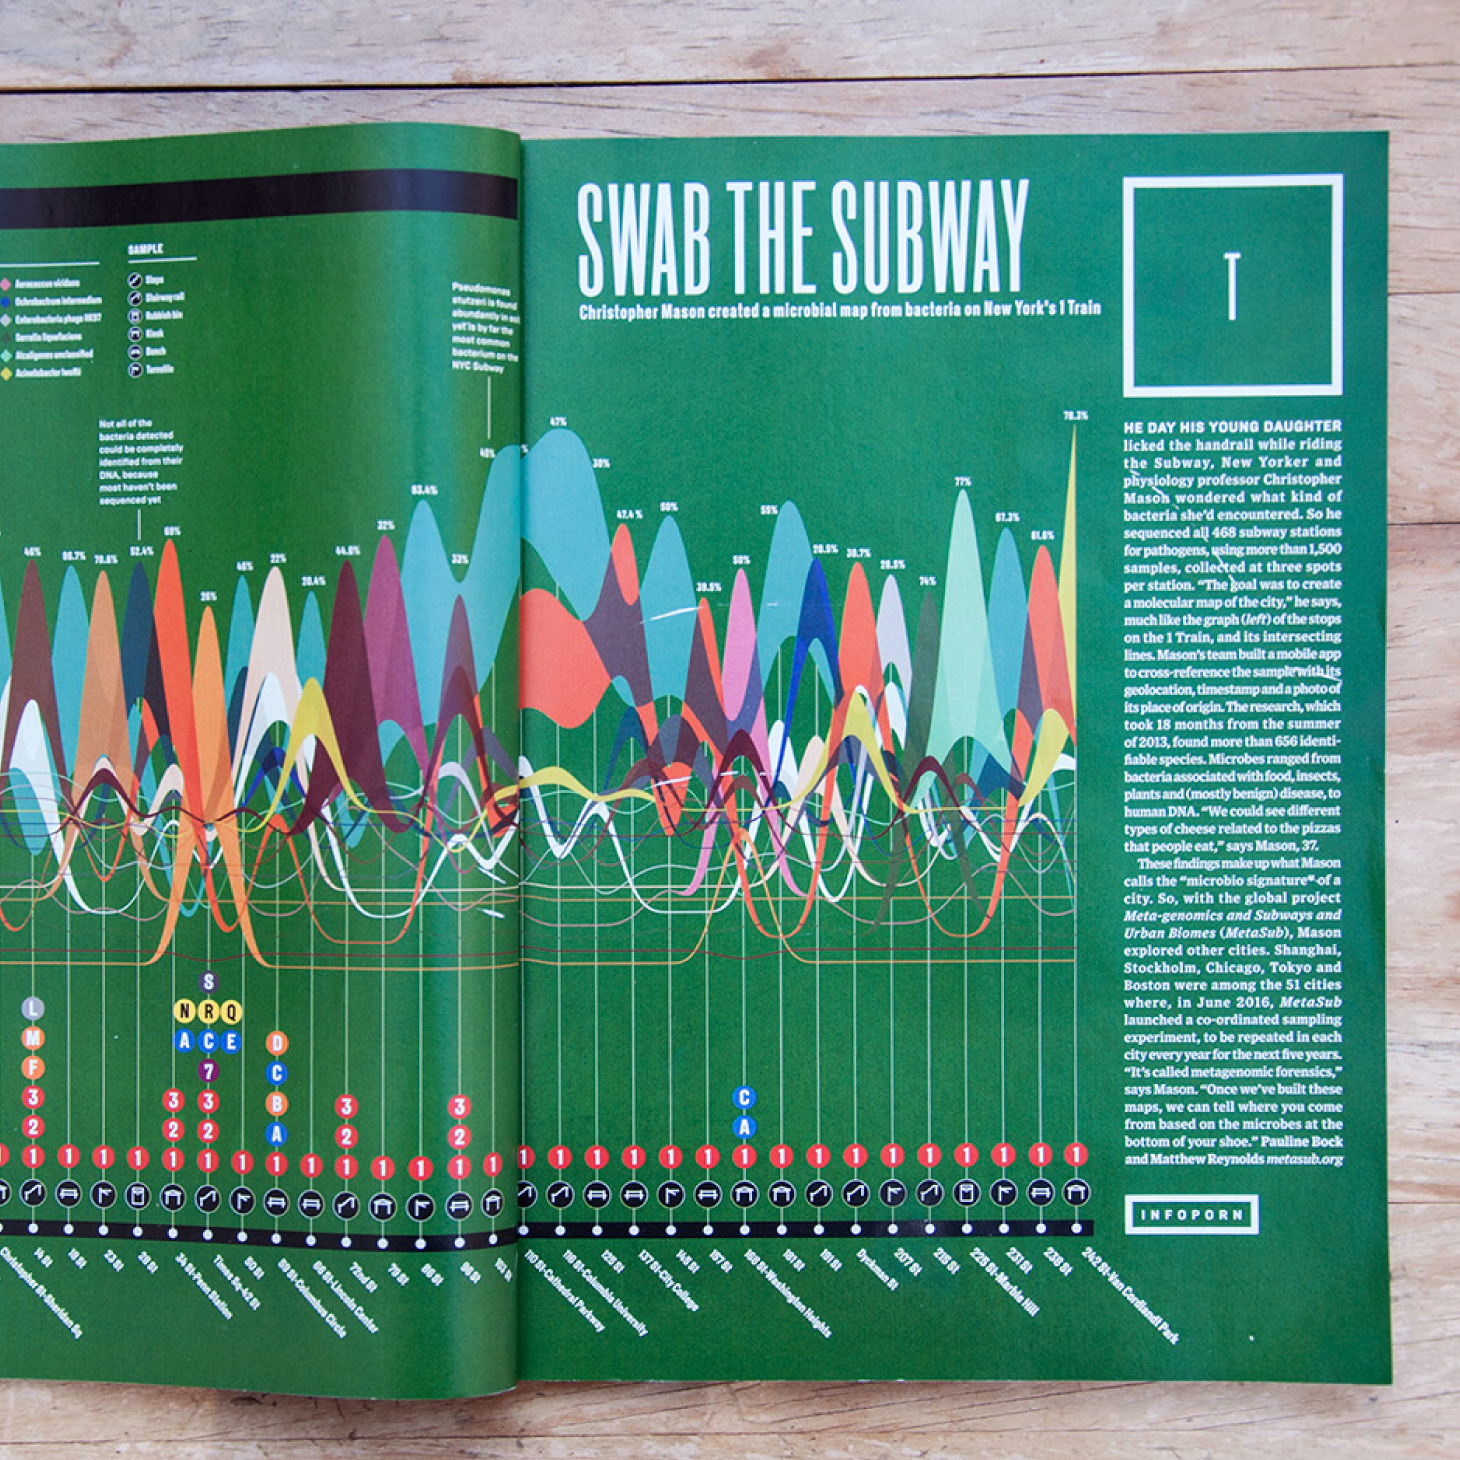 Swab the subway on Wired UK